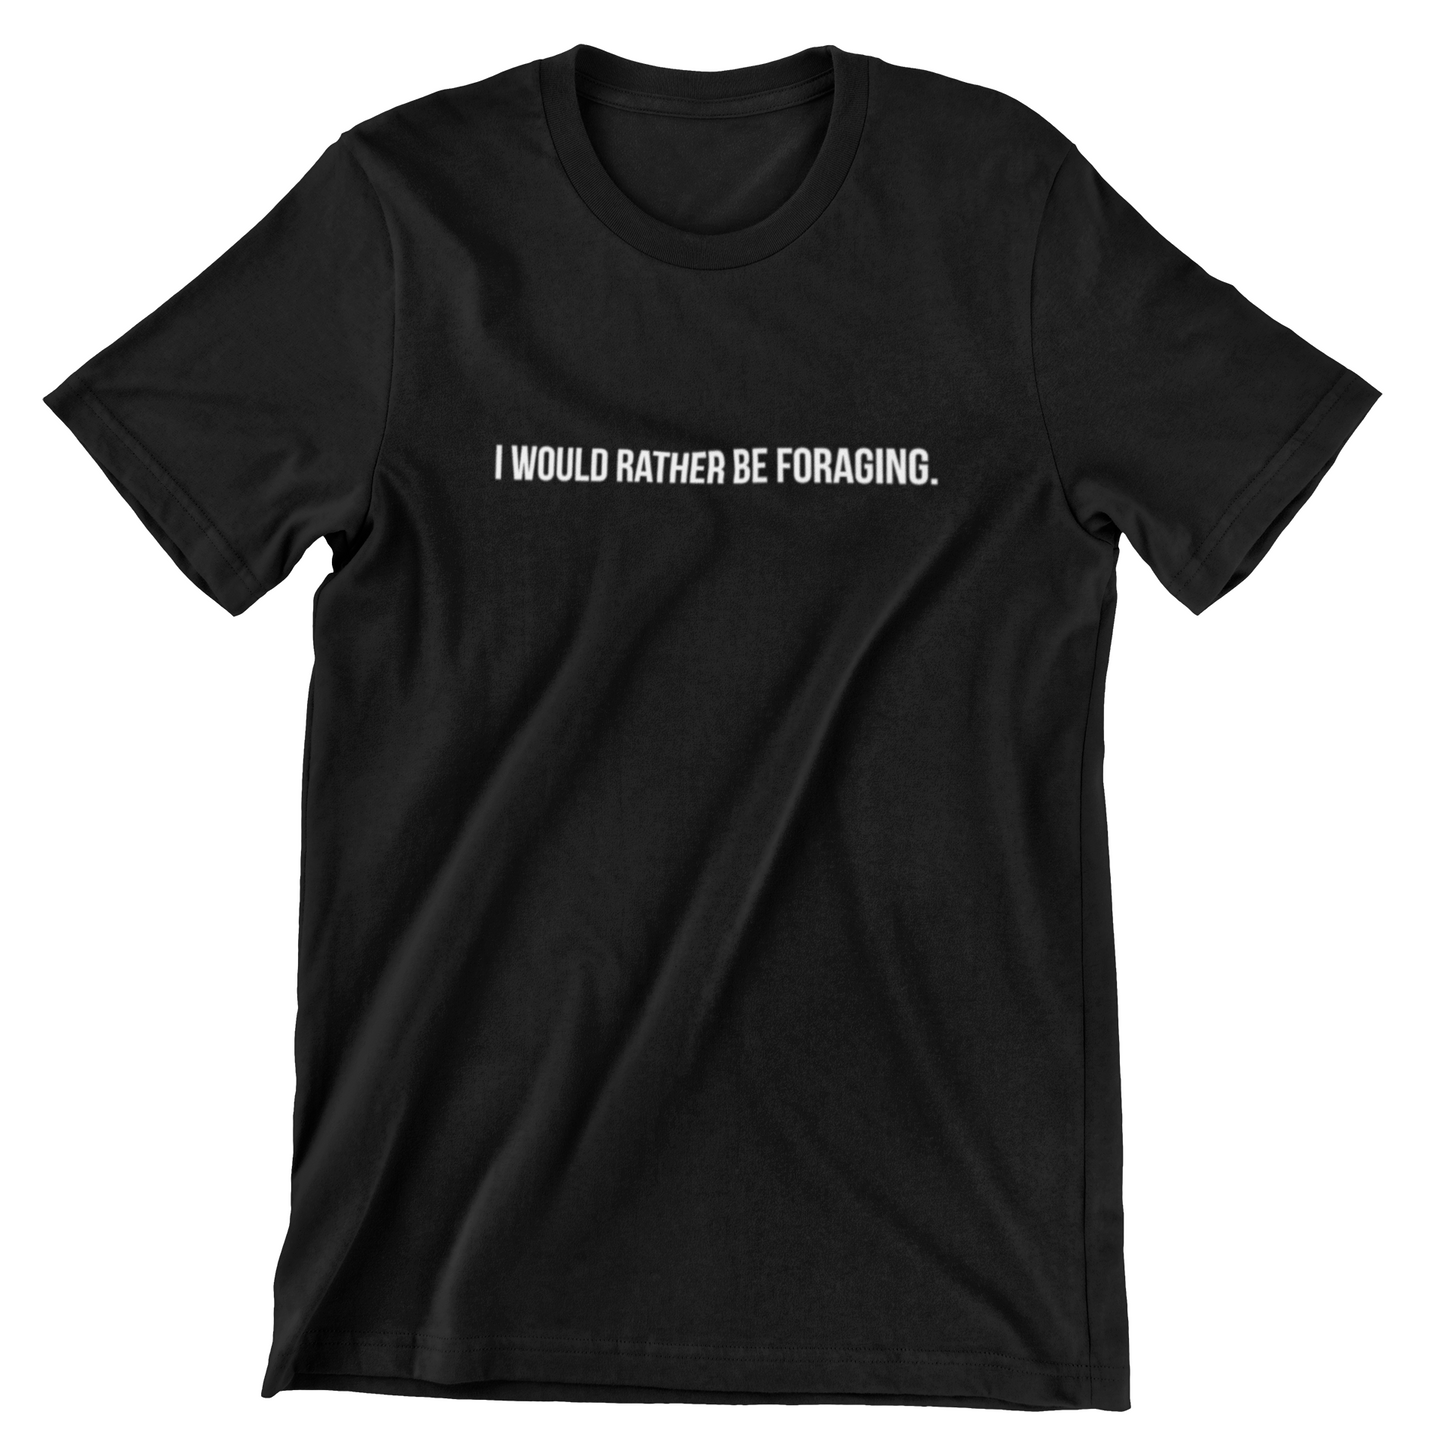 I Would Rather Be Foraging. | 100% Cotton T-Shirt | Funny Foraging/Nature Shirt